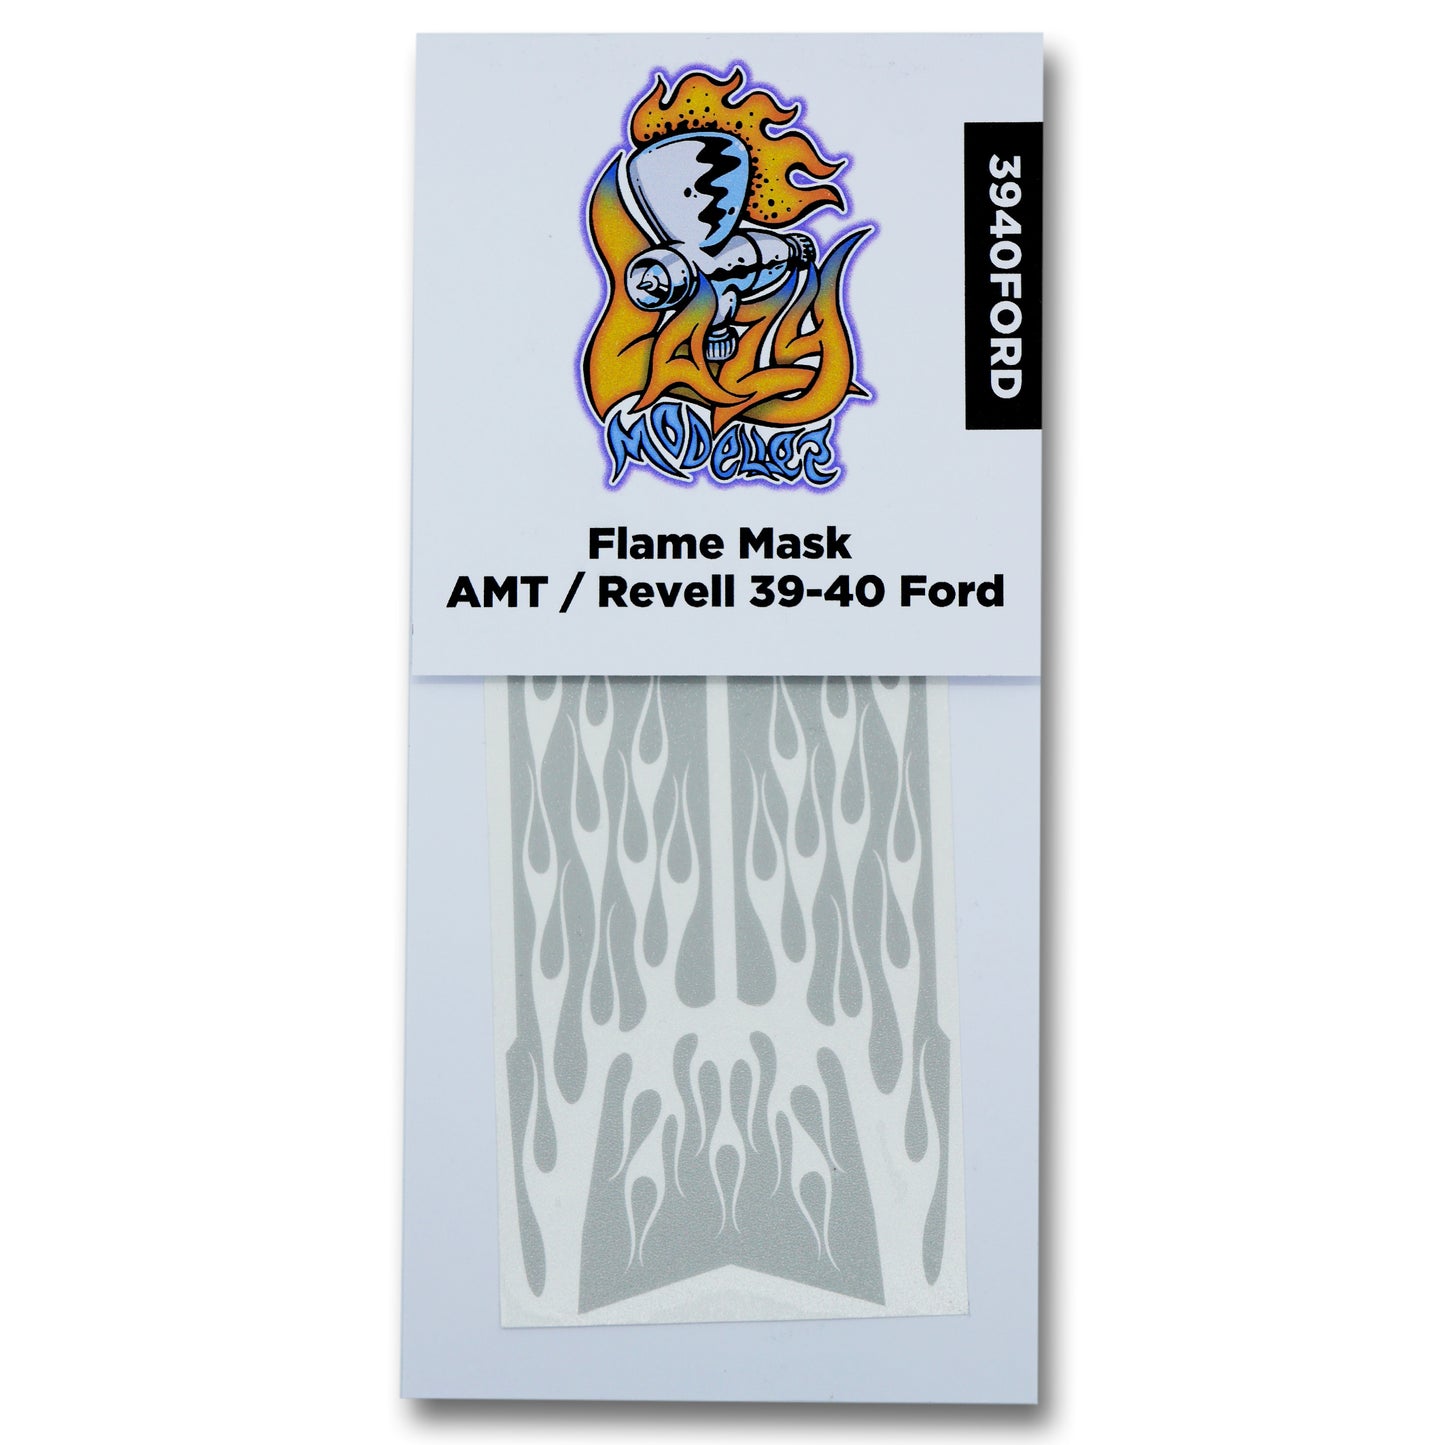 13. Flame Mask for AMT 39 - 40 Ford 1/24 1/25